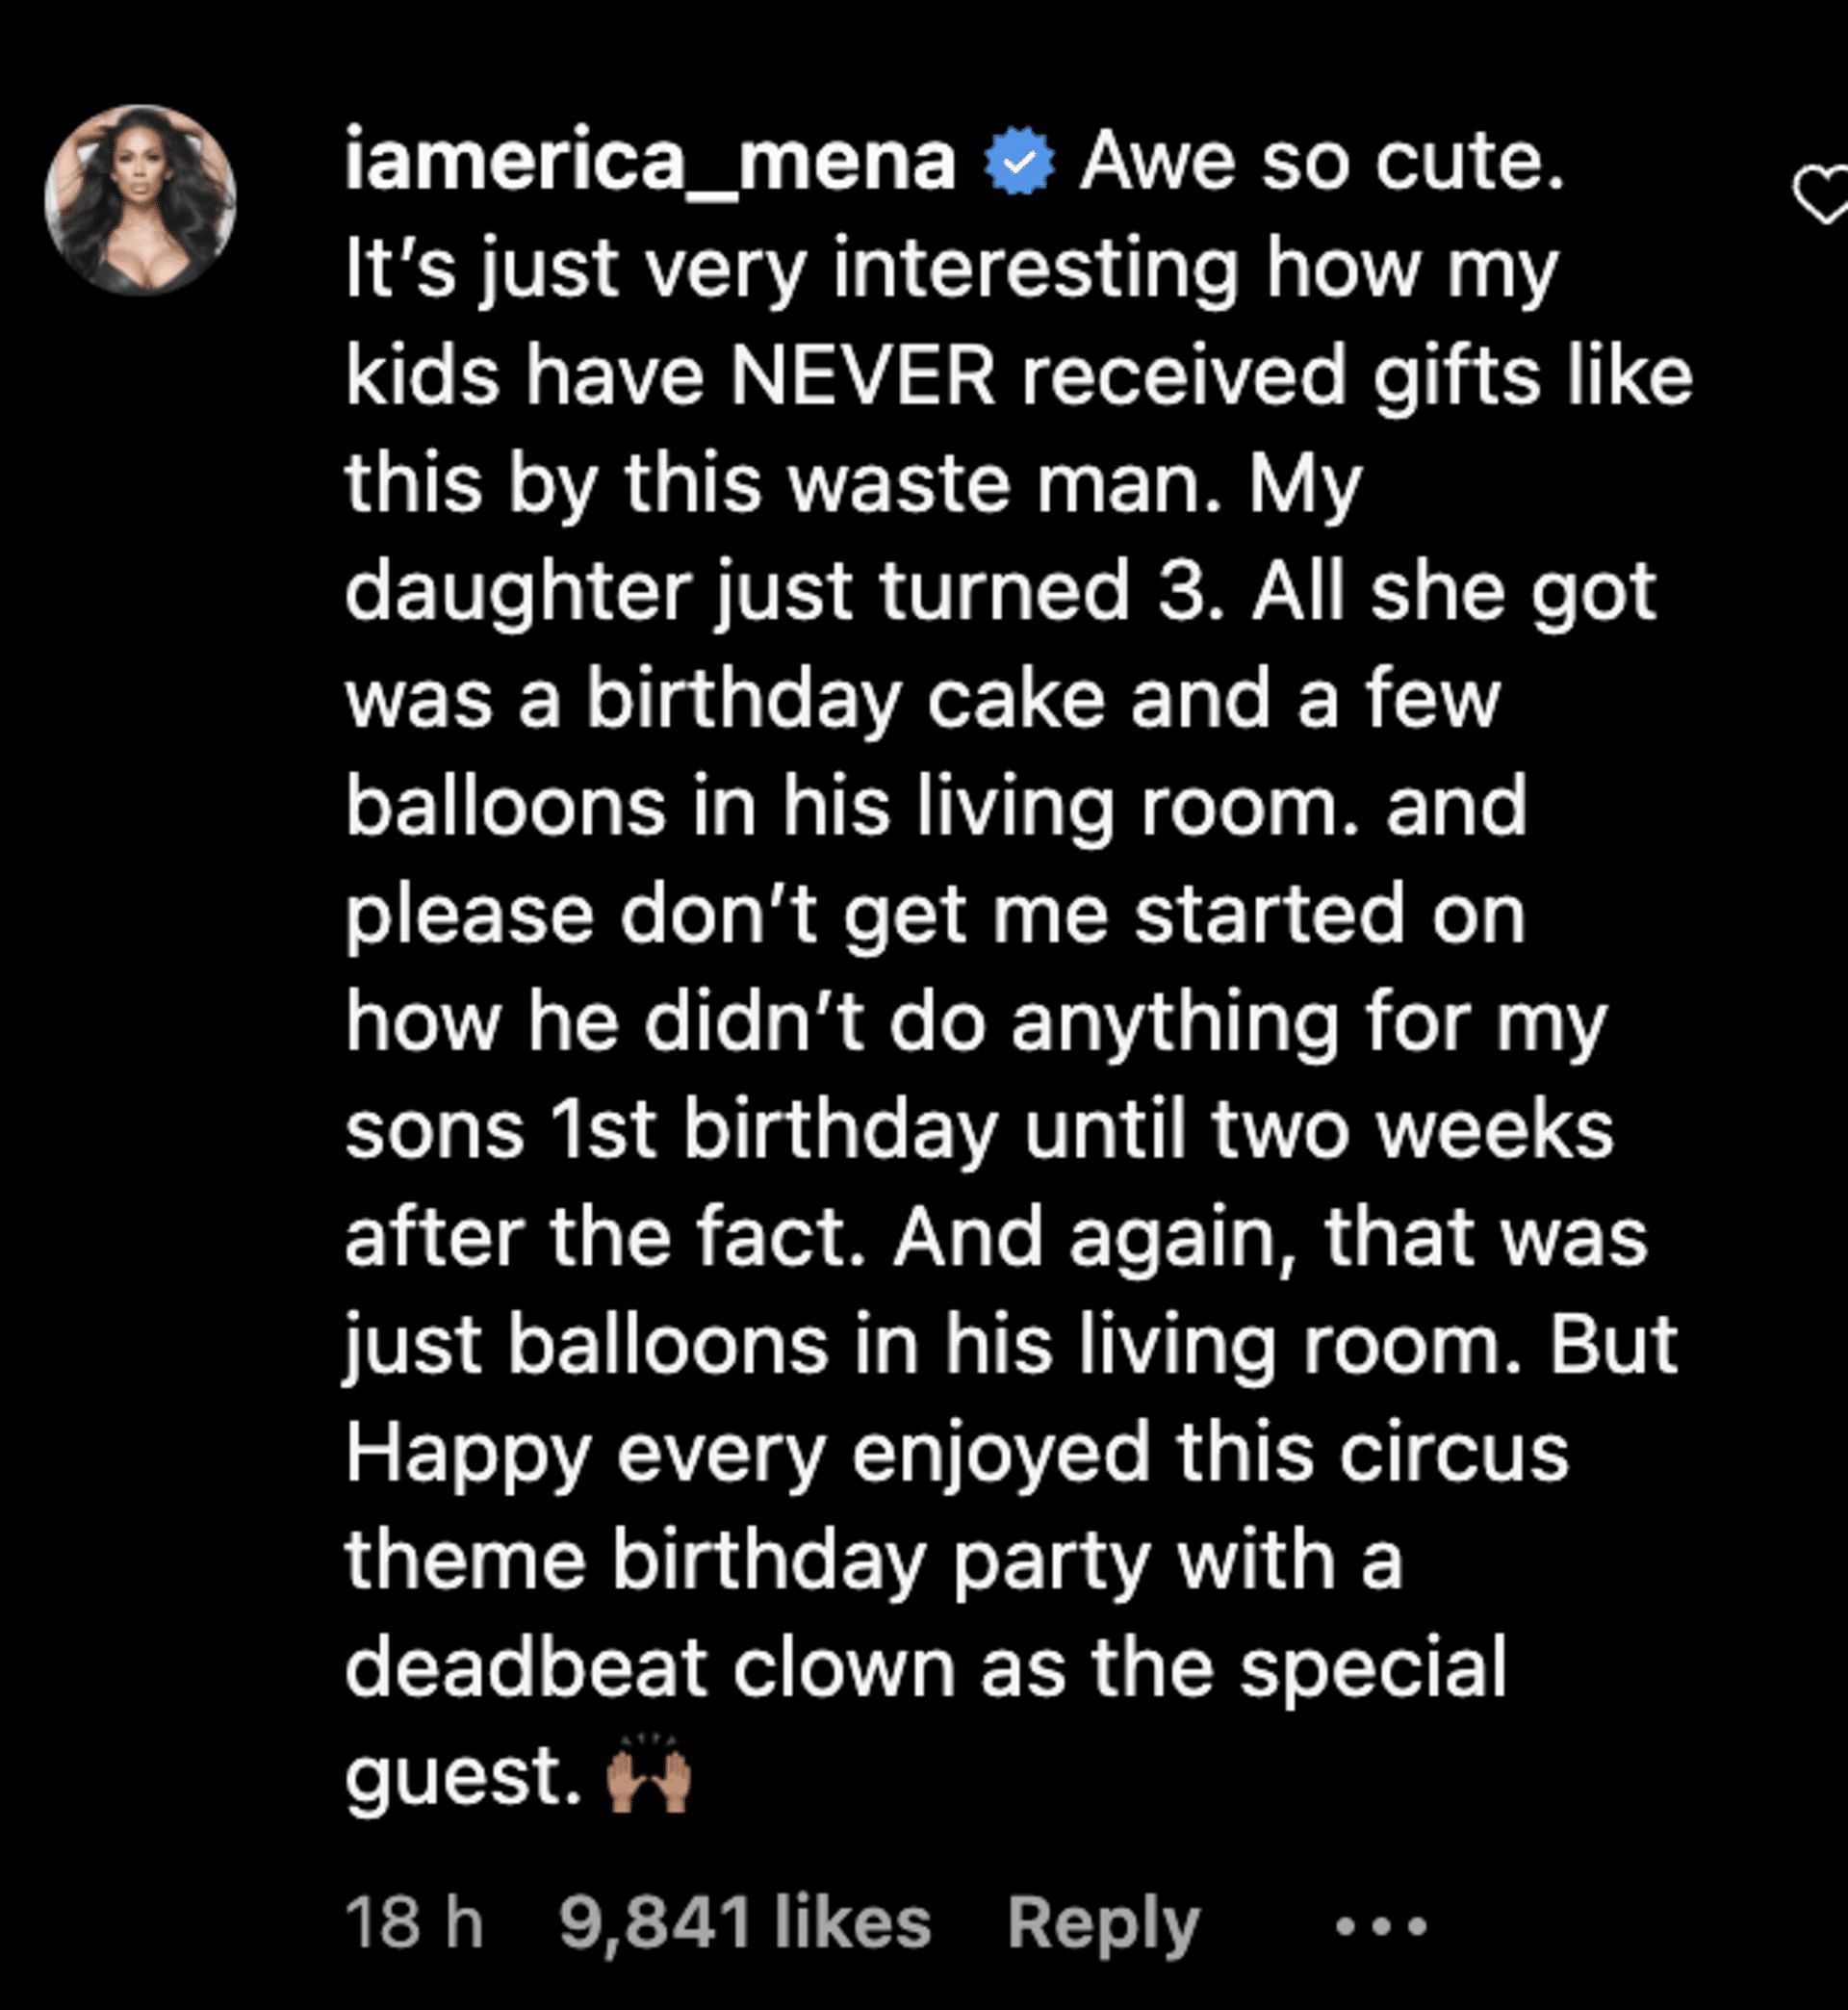 Erica slammed her ex, Safaree, after he gifted luxury watches to Amara&#039;s twins. (Image via Instagram)